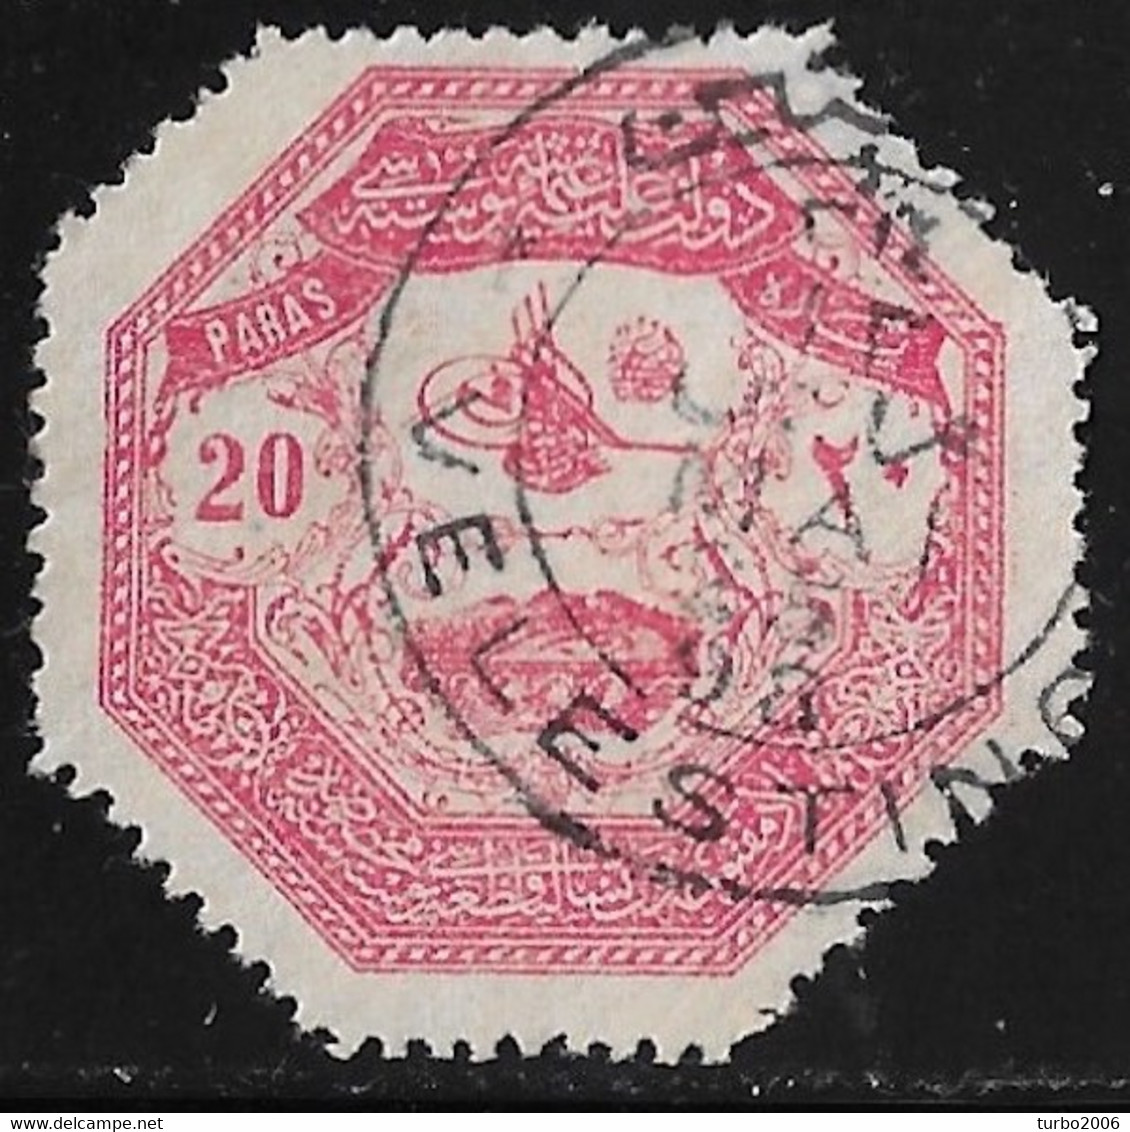 THESSALIA  1898 20 Pa Red Used VELESTINON By The Turkish Army Of Occupation During The Greek-Turkish War Of 1897 Vl. 2 - Thessalie